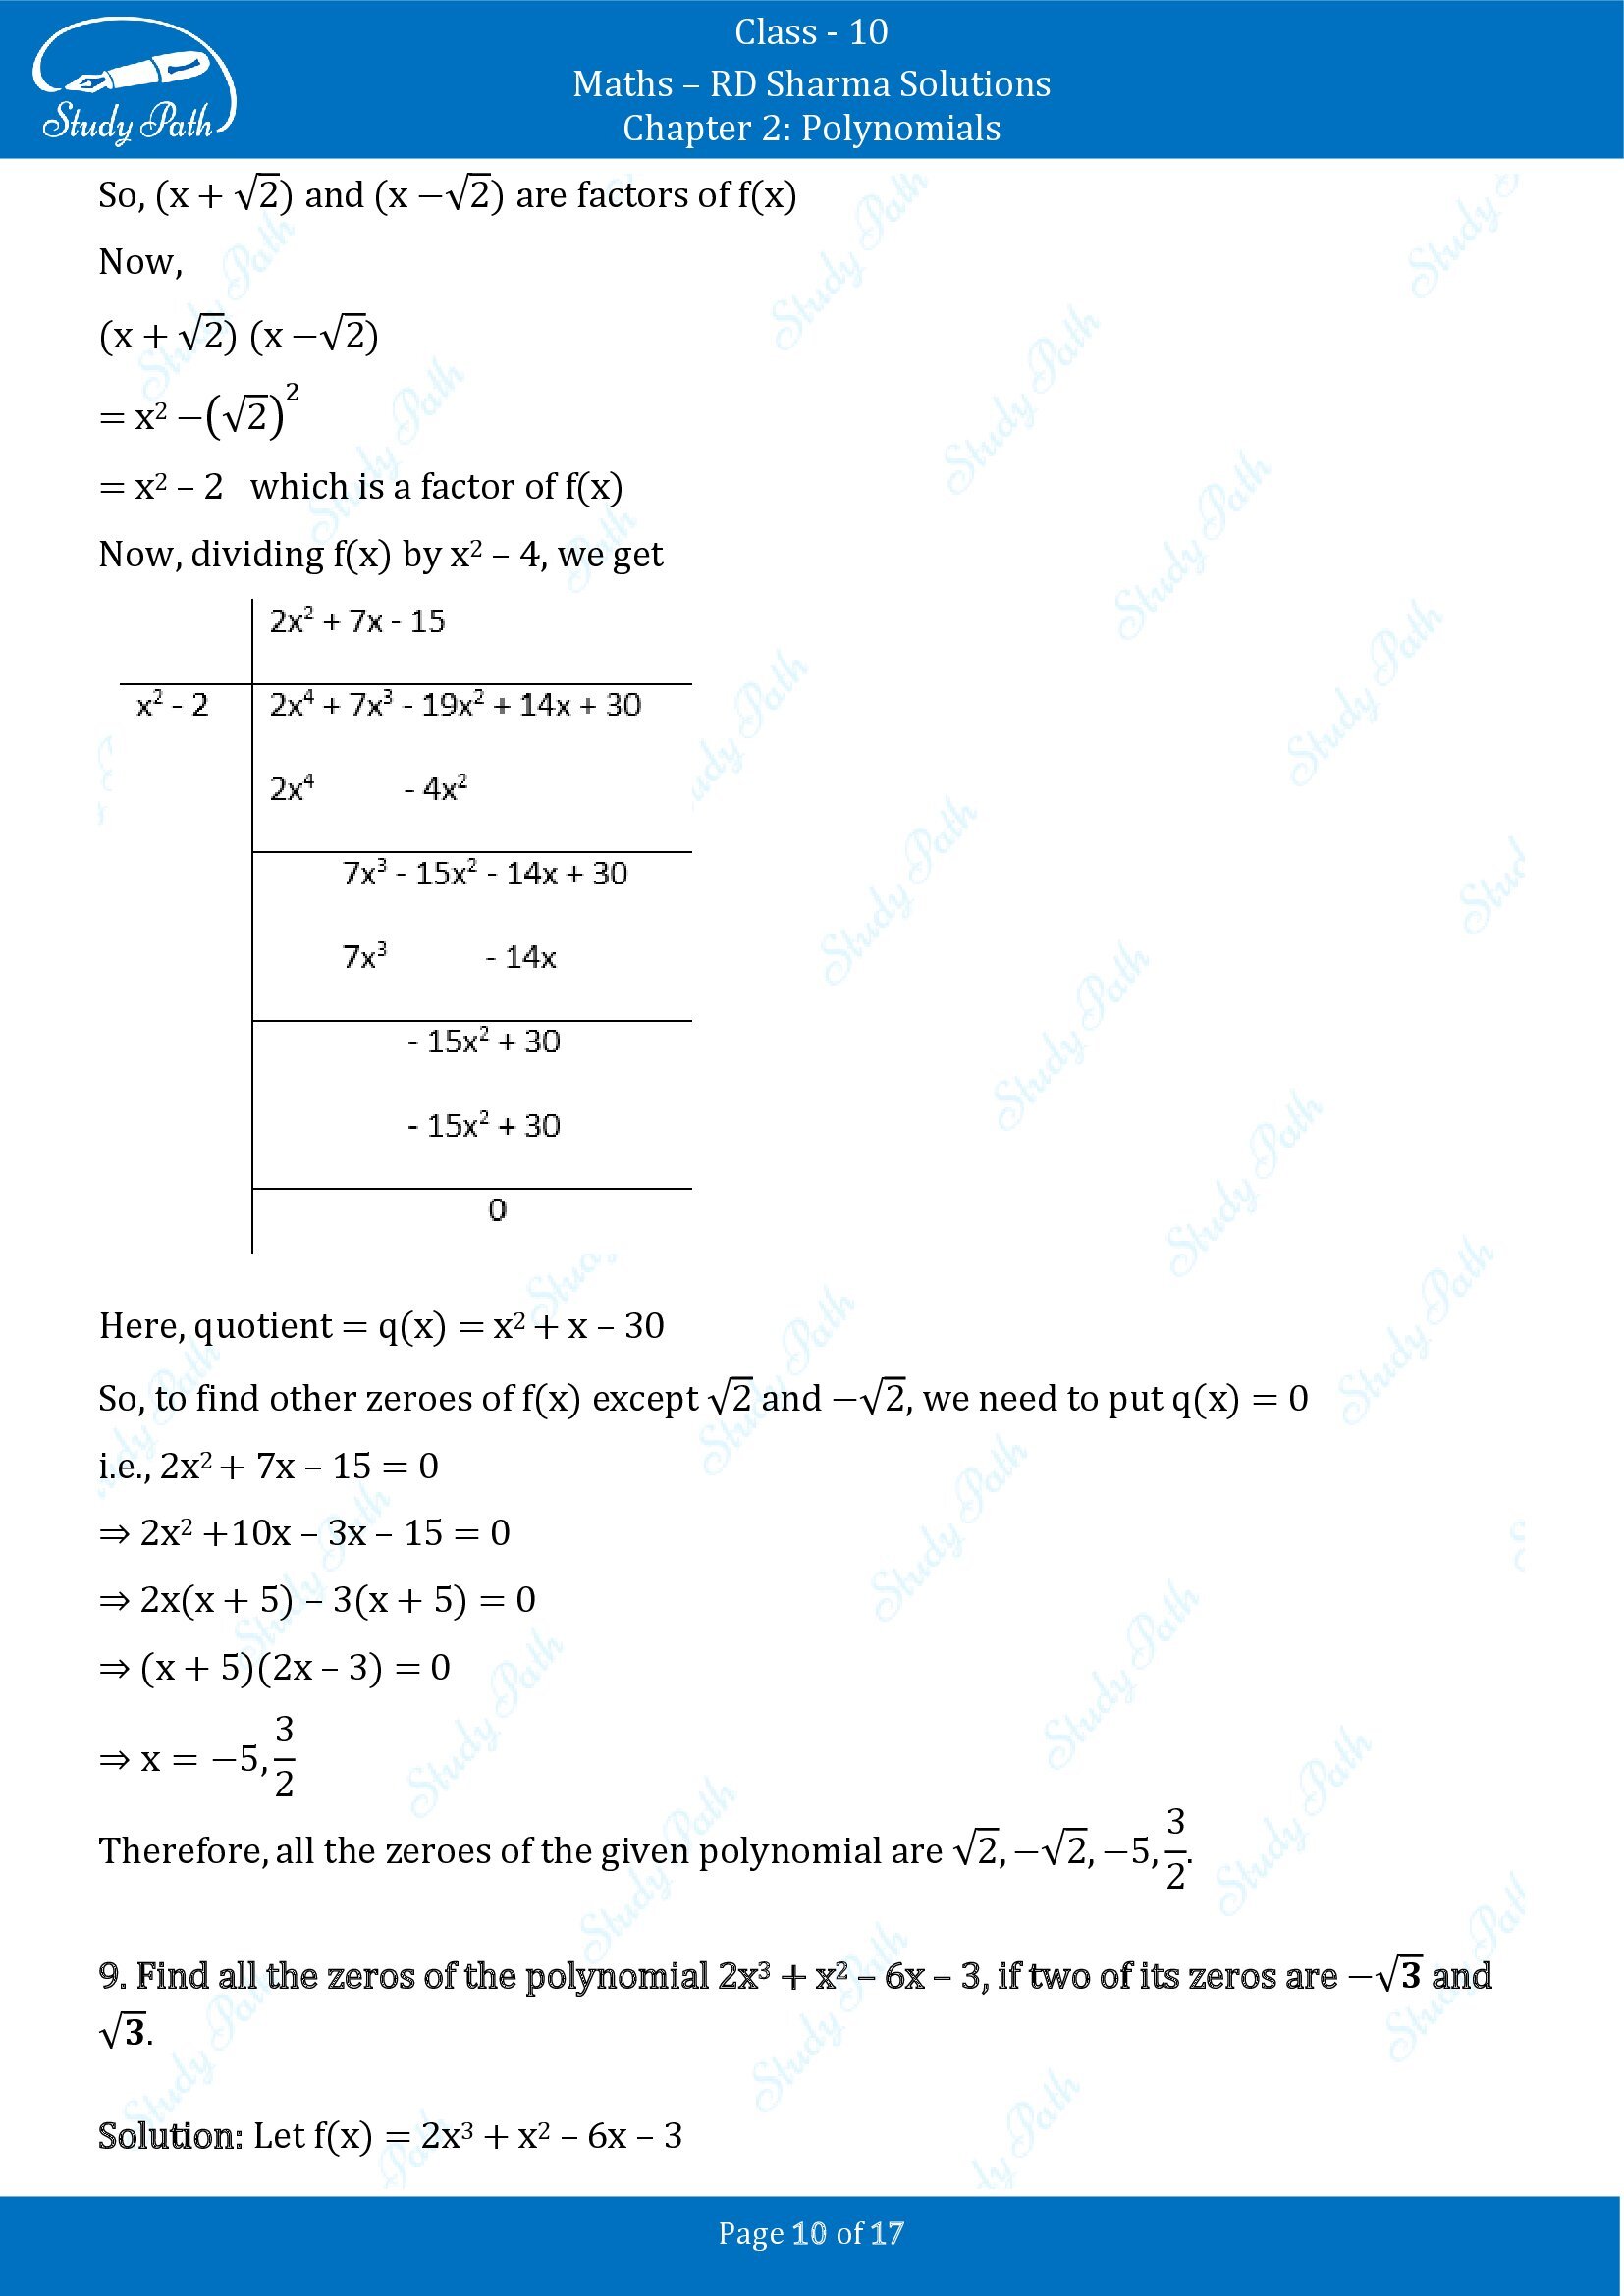 RD Sharma Solutions Class 10 Chapter 2 Polynomials Exercise 2.3 00010